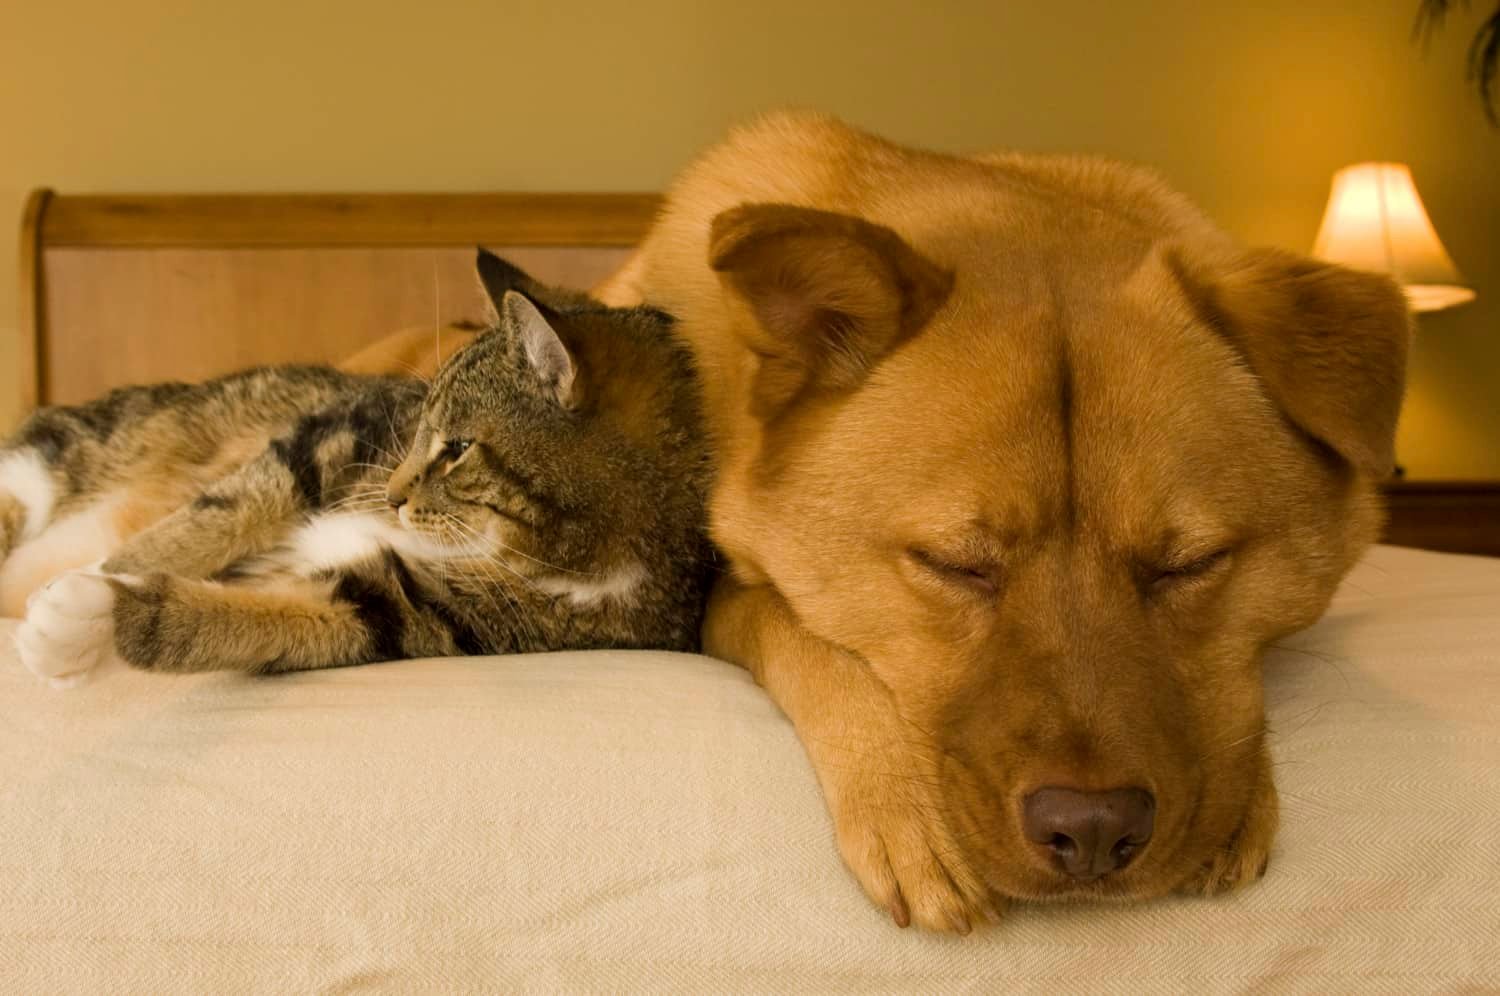 Cat and dog are resting on the bed in a pet friendly hotel